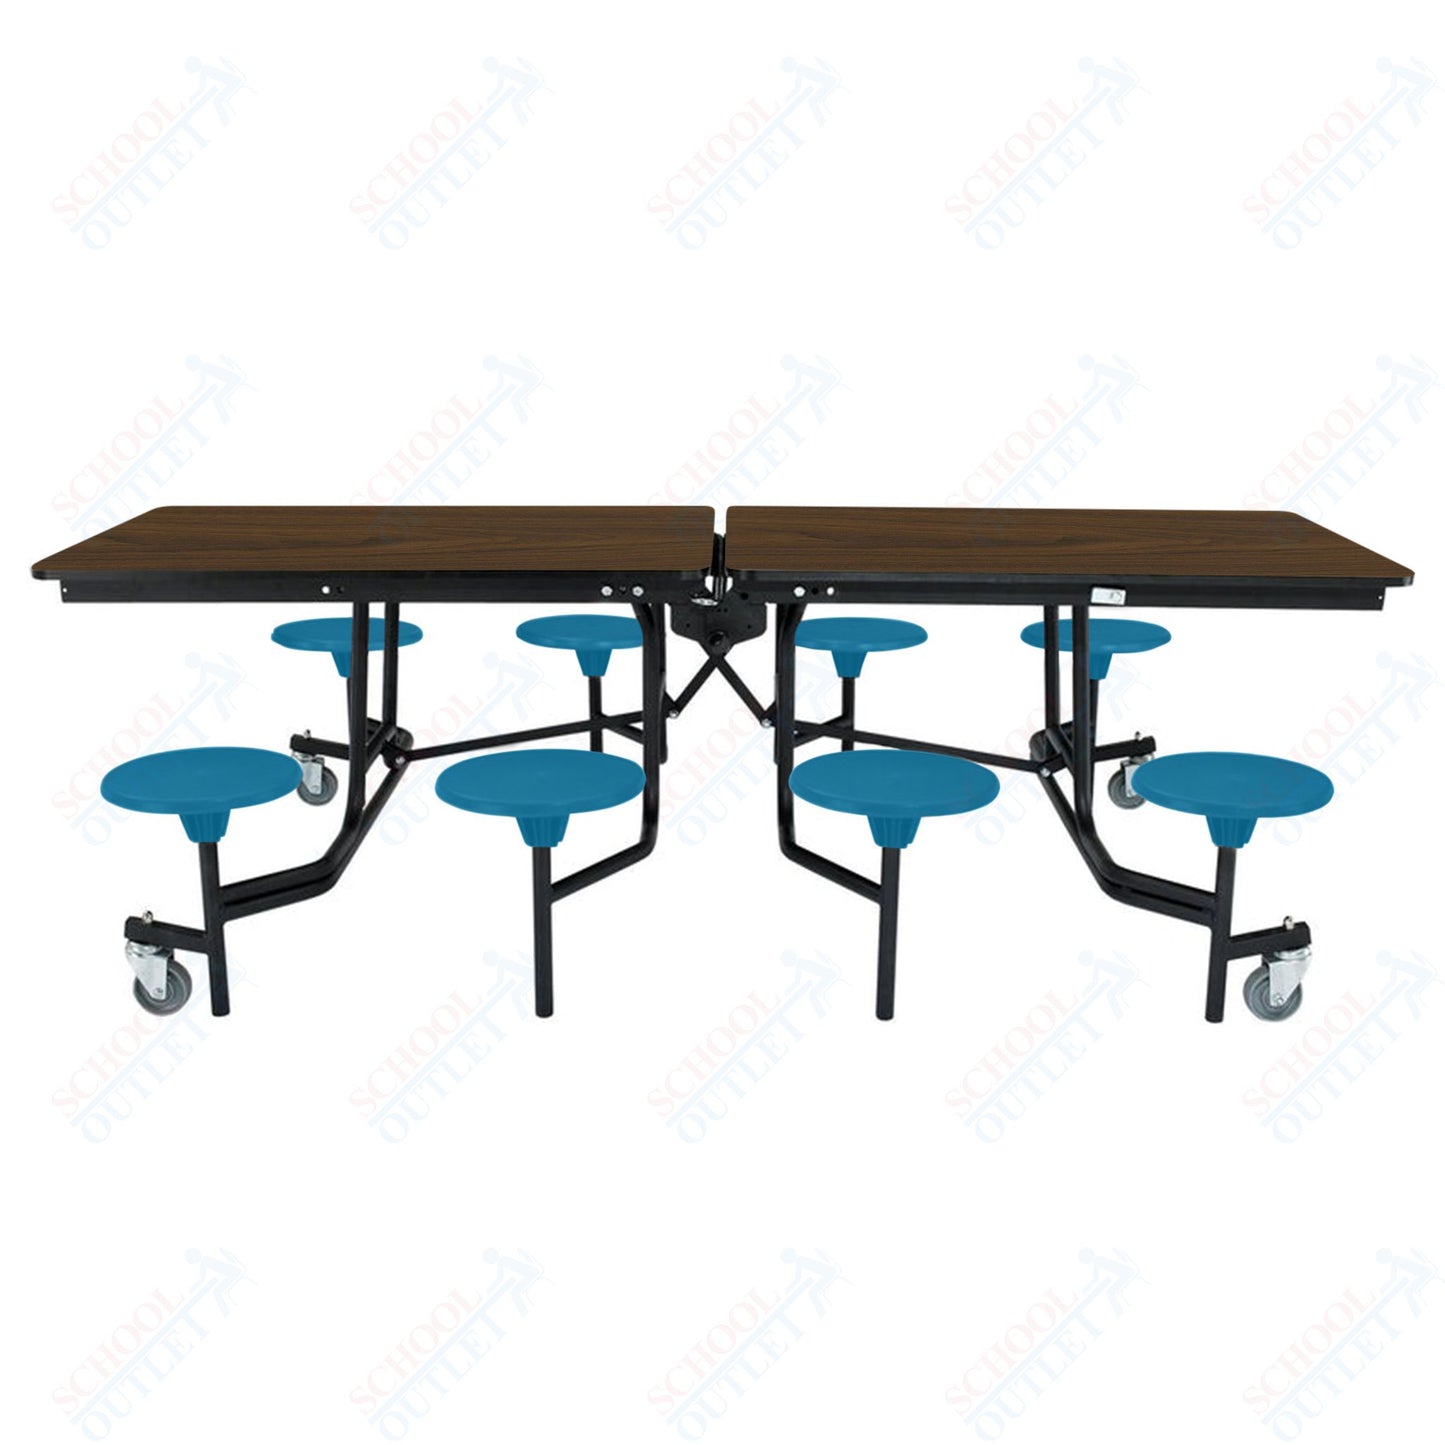 NPS Mobile Cafeteria Table - 30" W x 8' L - 8 Stools - MDF Core - Protect Edge - Black Powdercoated Frame